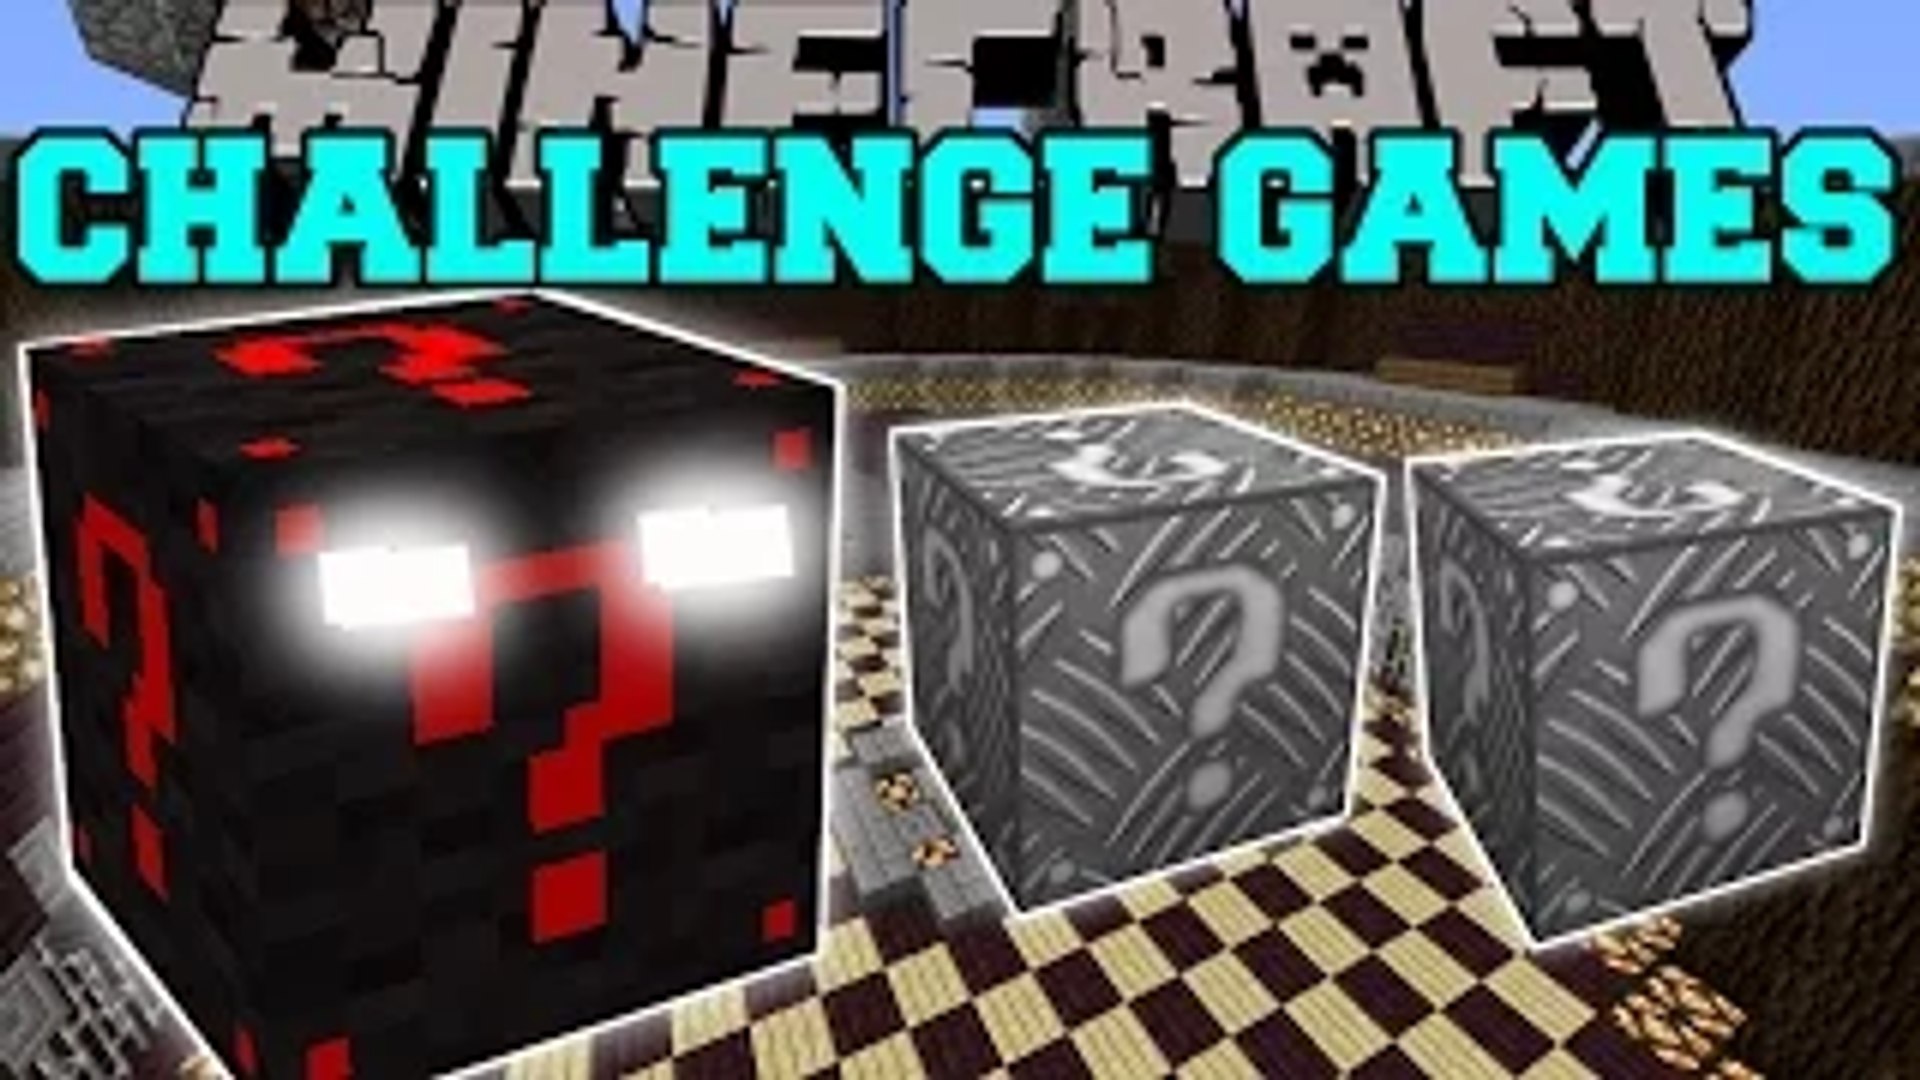 PopularMMOs PAT AND JEN Minecraft: SKELETON TITAN - Lucky Block Mod  GAMINGWITHJEN - video Dailymotion